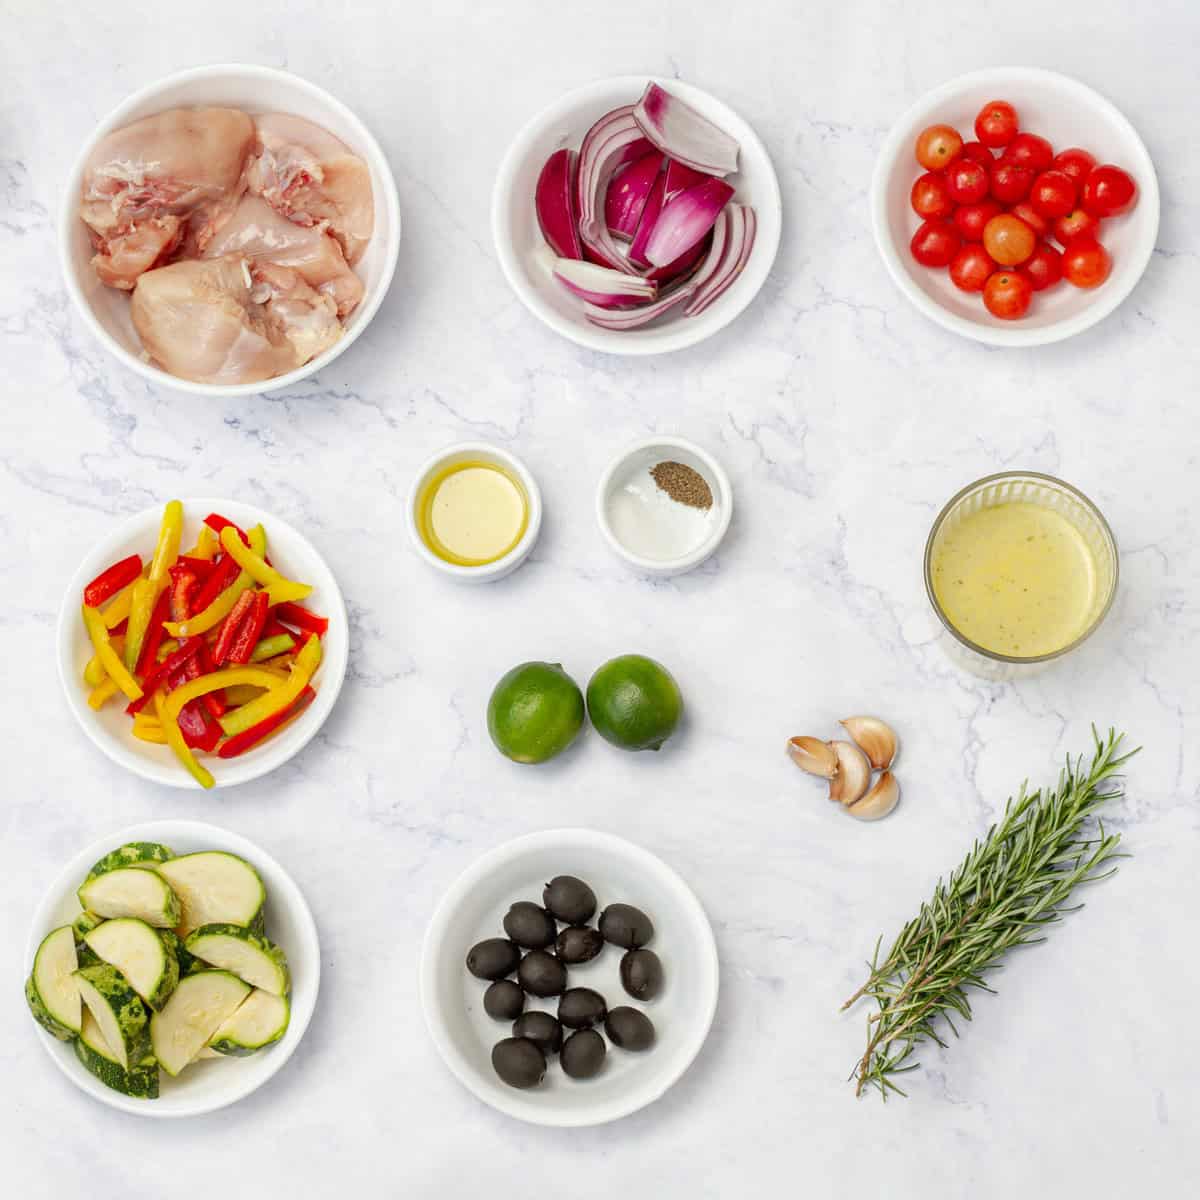 Greek Lemon Chicken ingredients of chicken breast, tomatoes, bell pepper, zucchini, olives, limes, garlic, sprigs, and and oil in separate dishes on a counter.